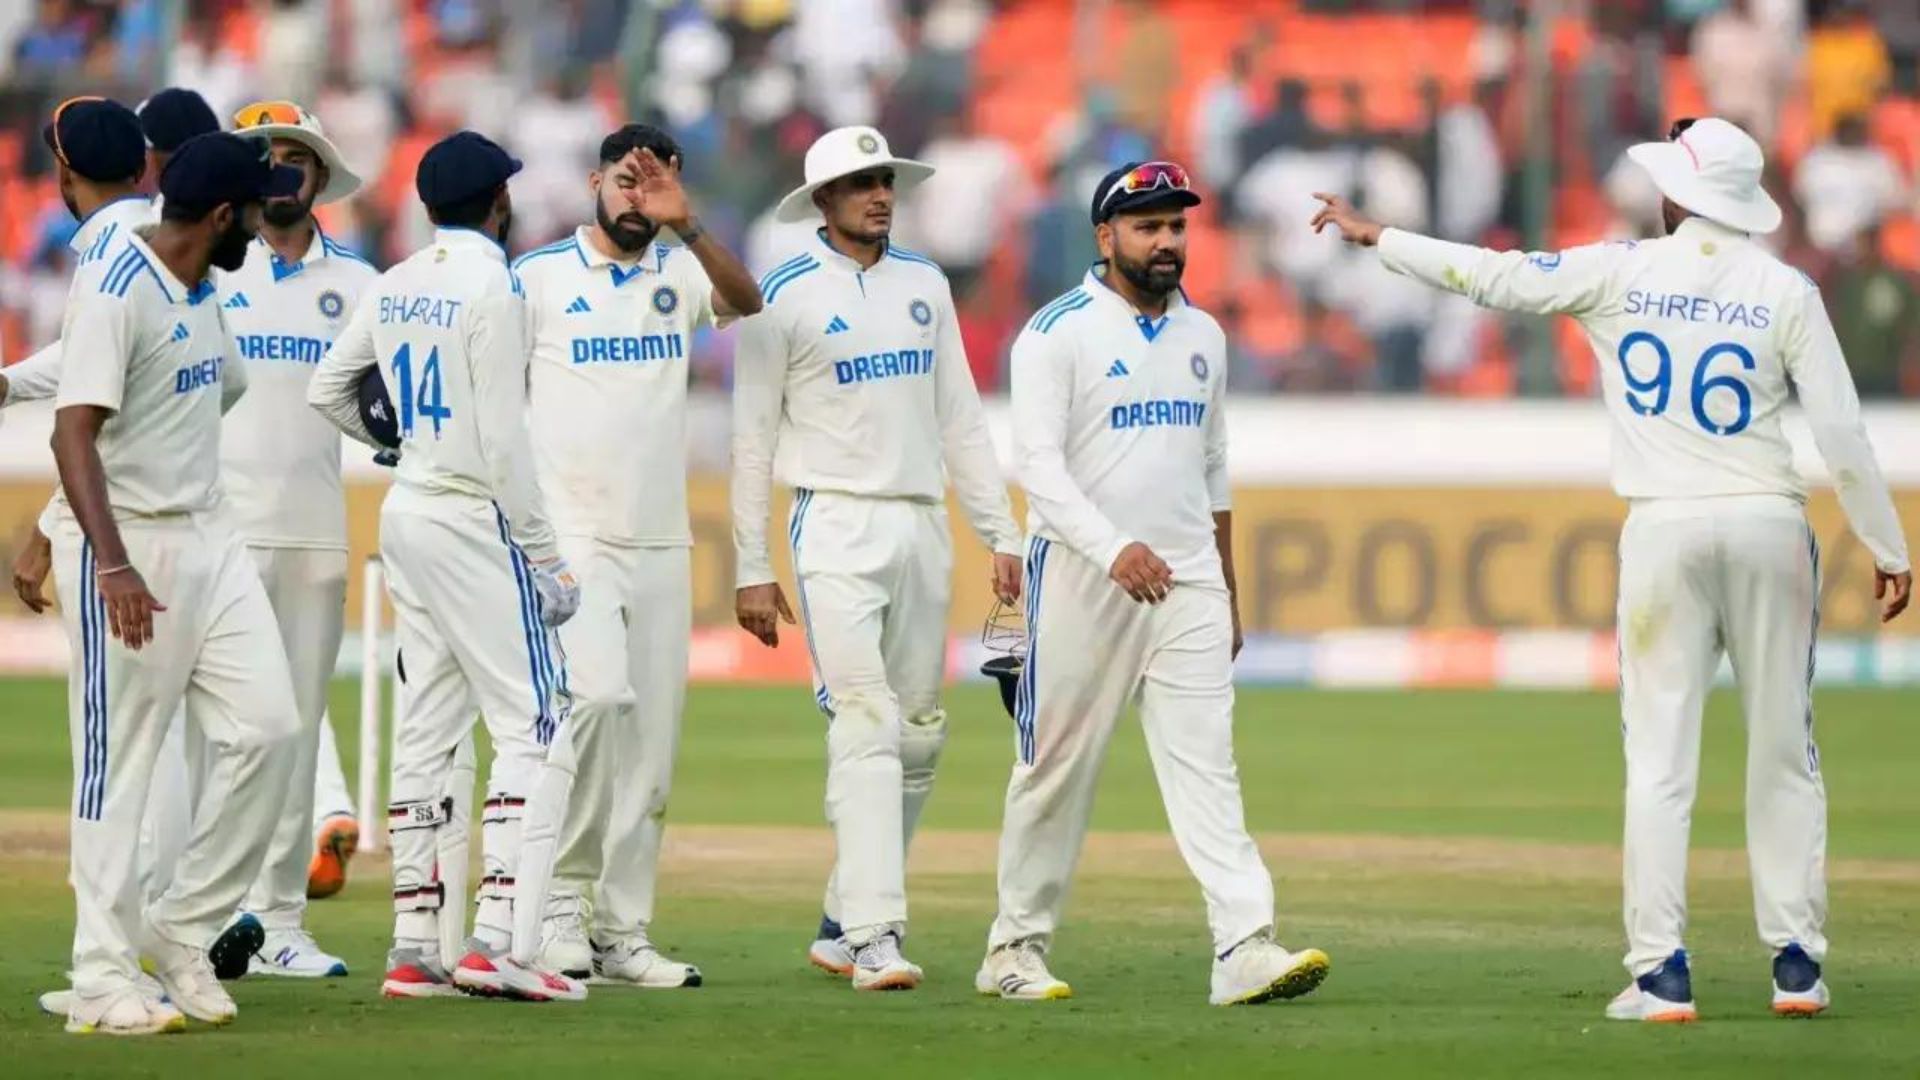 India vs England Live Score, 2nd Test Match 4th Day